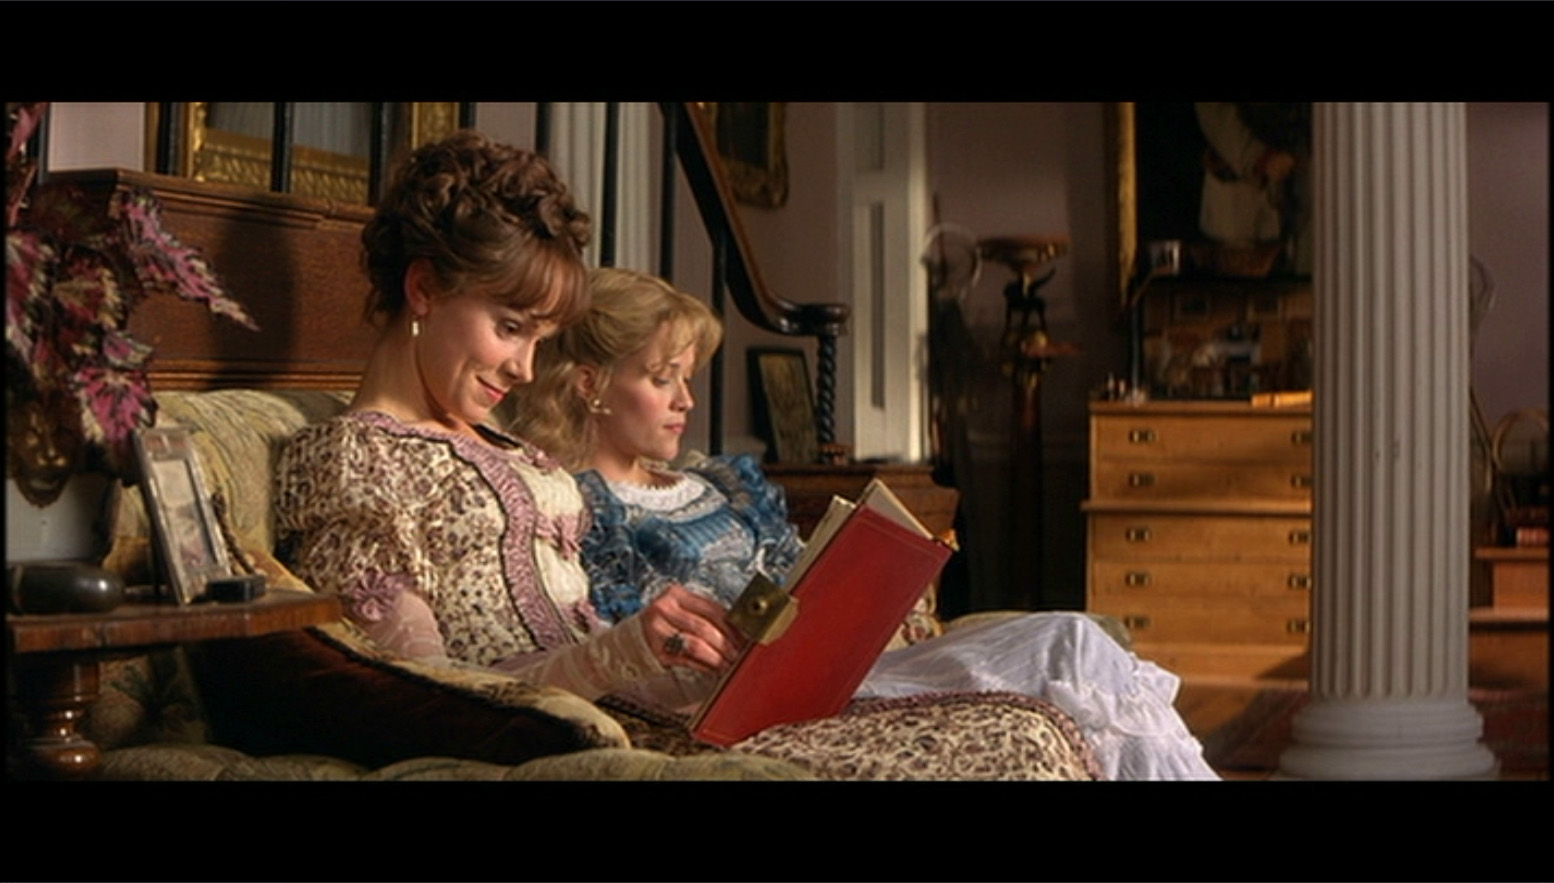 [The+Importance+of+Being+Earnest+56+copy.jpg]